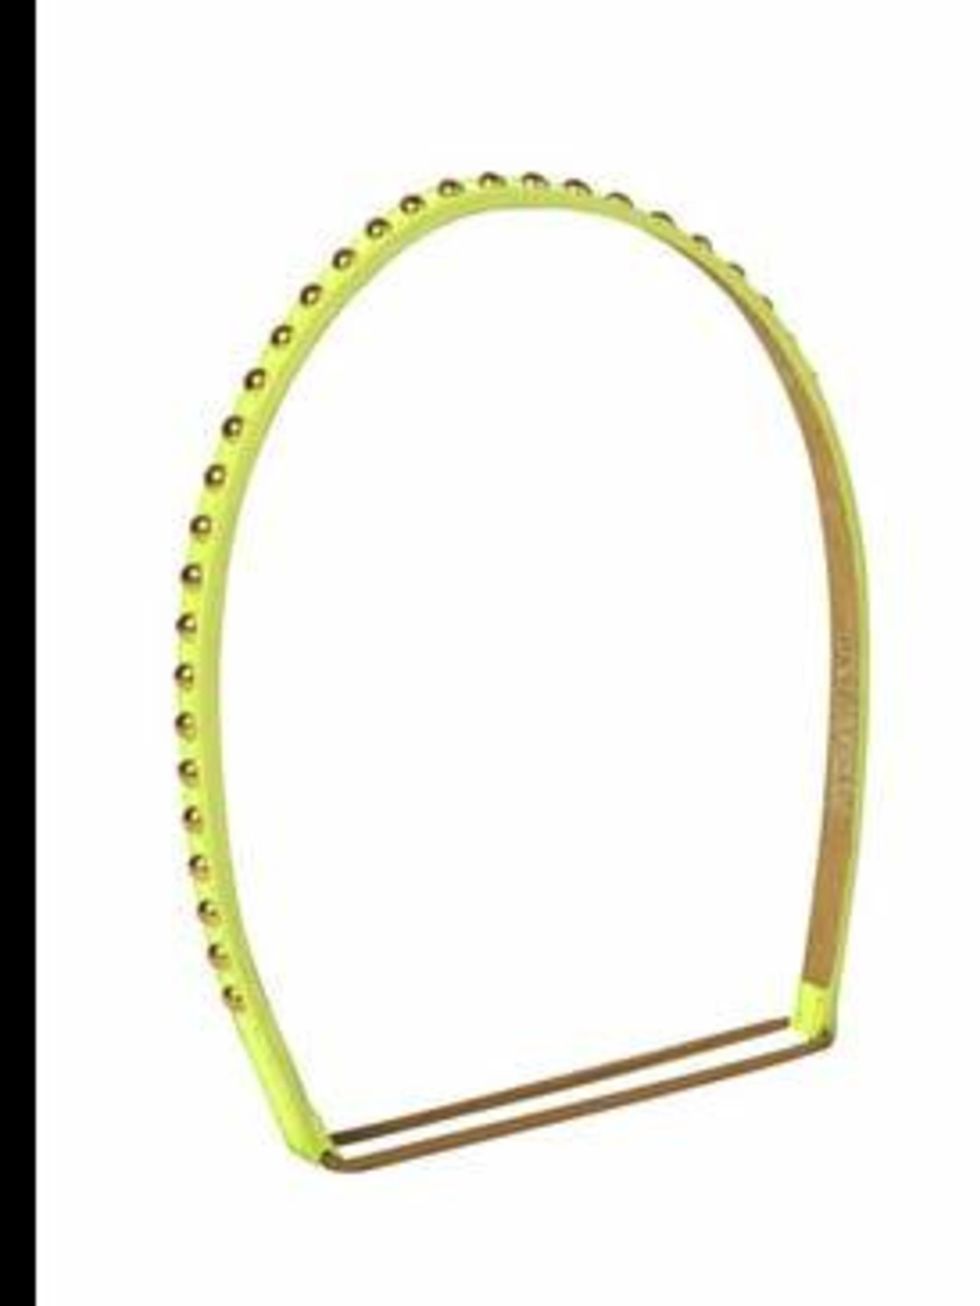 <p>Headband, £115 by Jennifer Behr at <a href="http://www.liberty.co.uk/fcp/product/Liberty/Accessories/Patent-Green-Studded-Headband,--Jennifer-Behr/11565">Liberty</a></p>